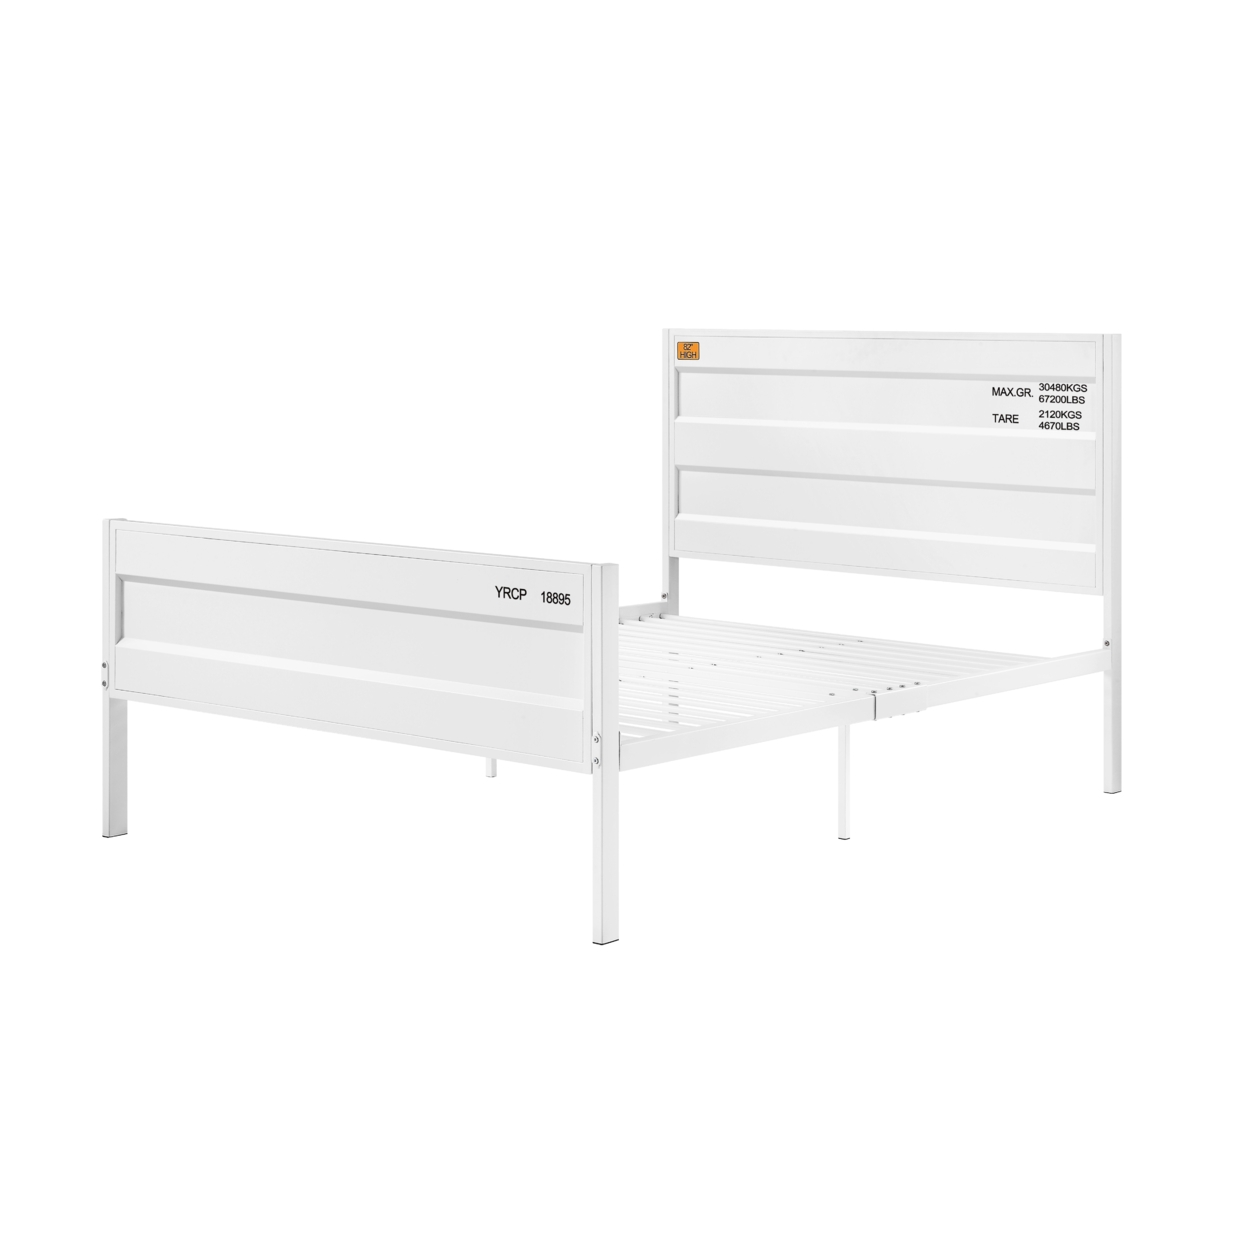 Industrial Style Metal Full Size Bed With Straight Leg Support, White- Saltoro Sherpi